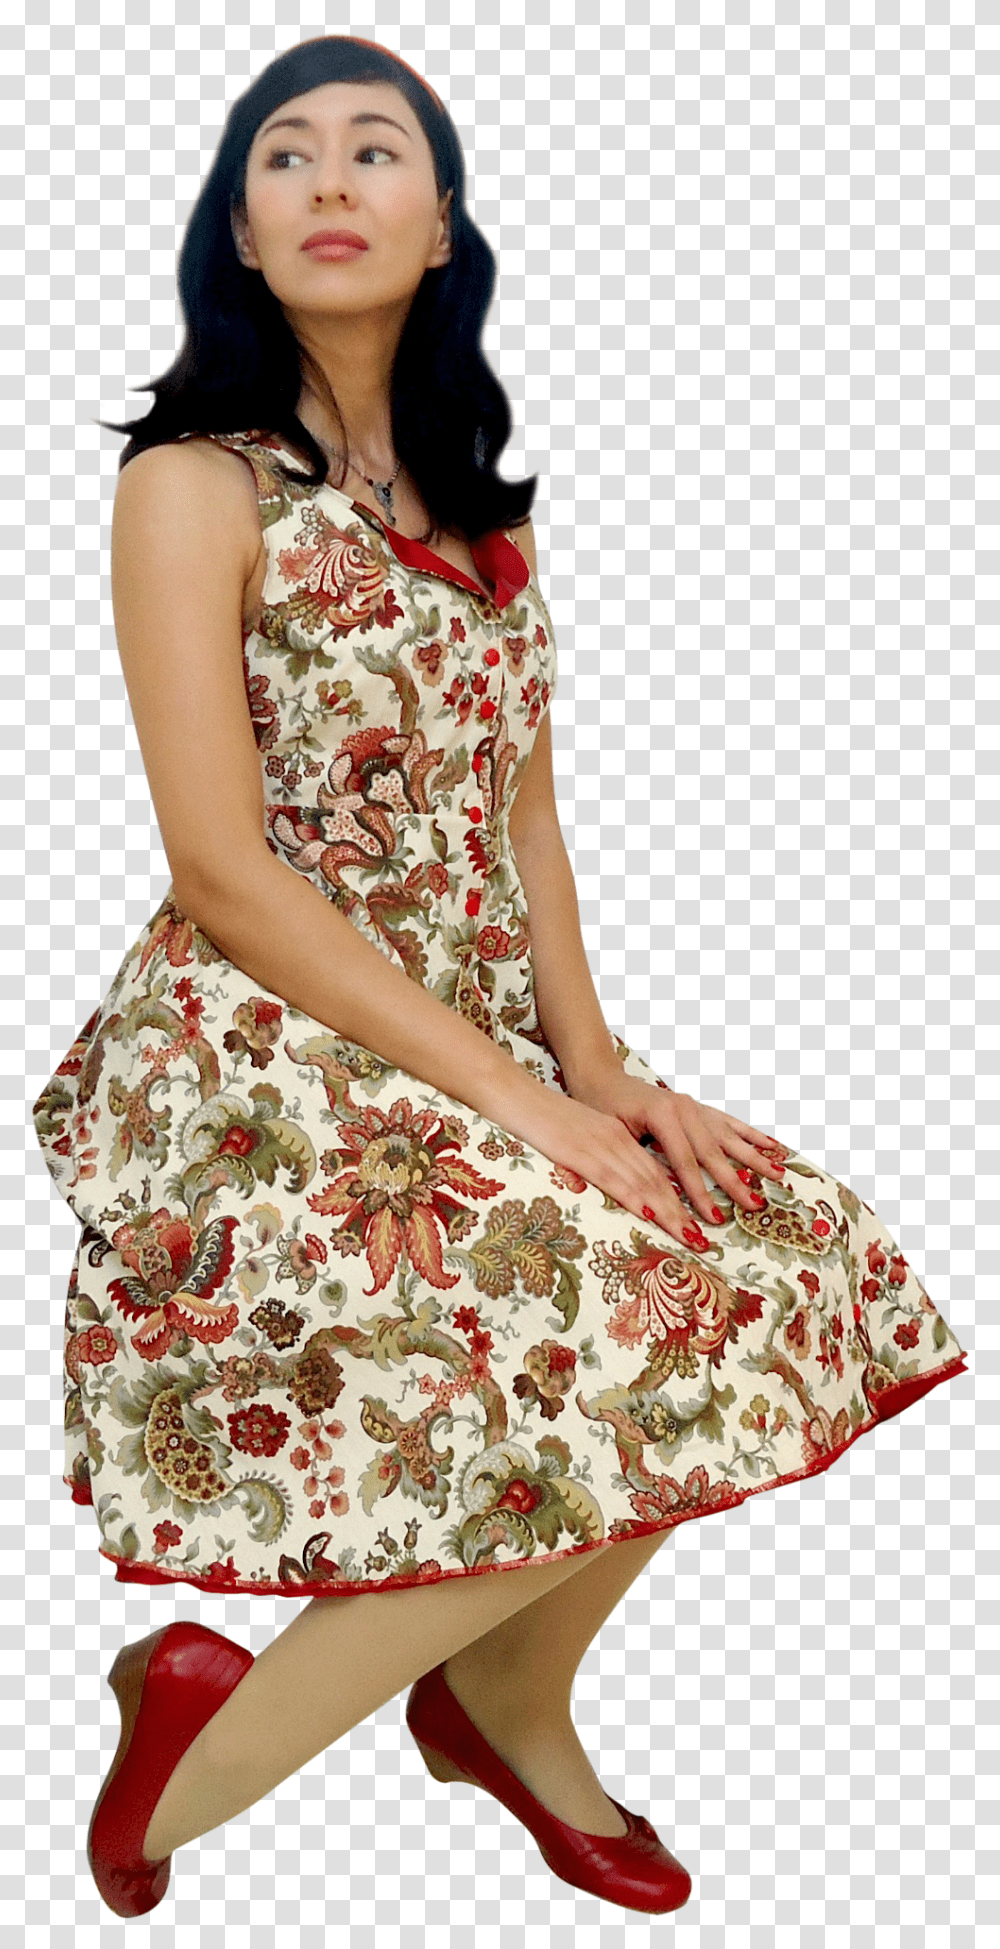 People Sitting On Chairs Chair, Dress, Skirt, Female Transparent Png